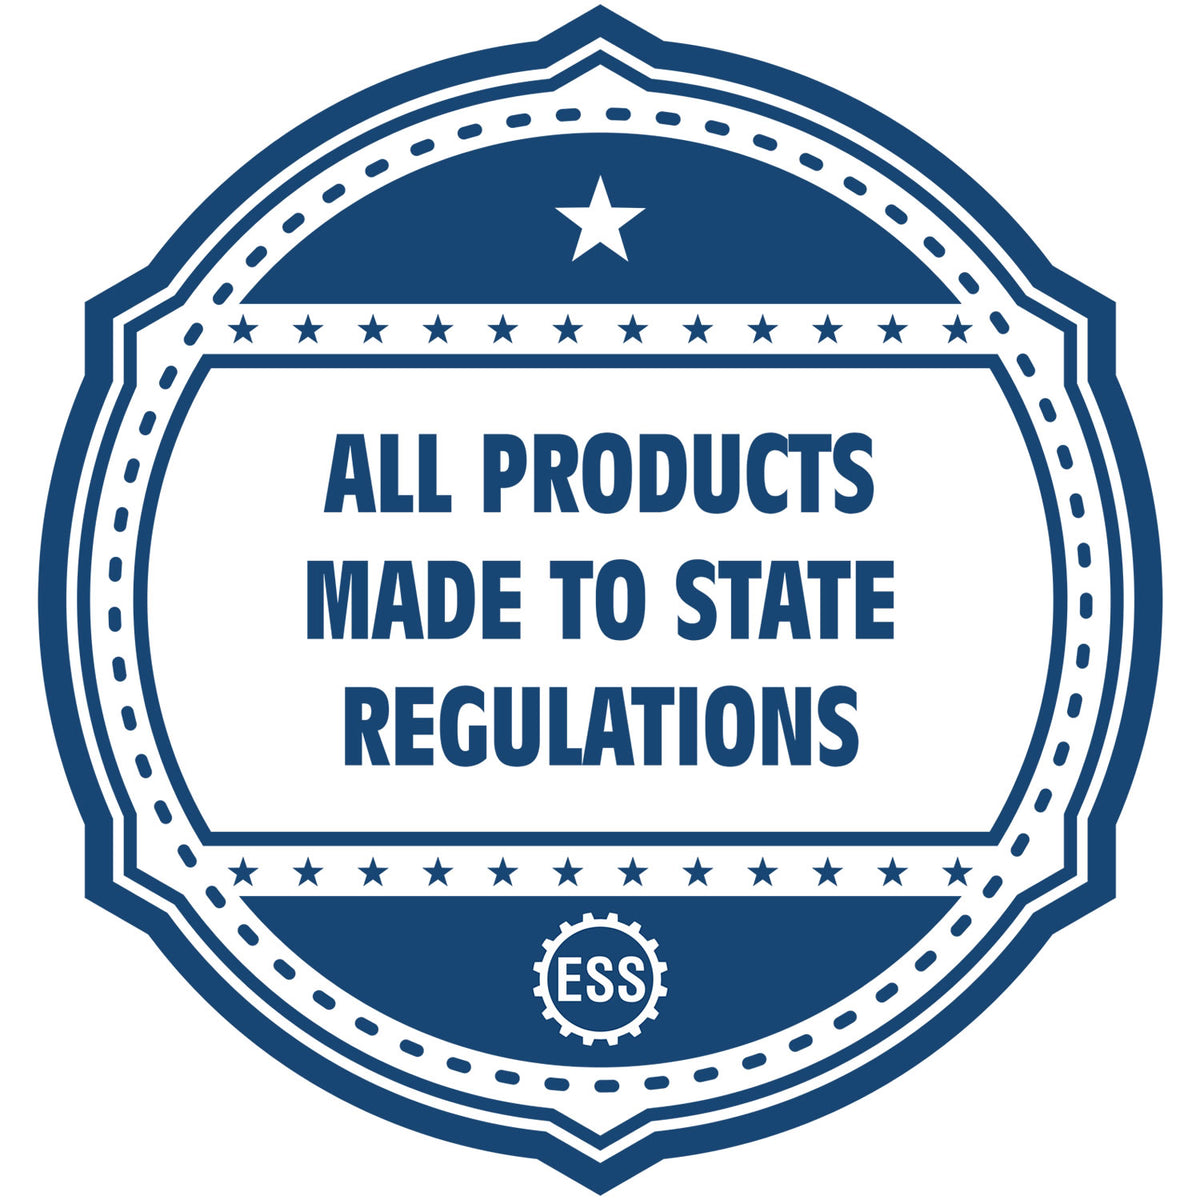 An icon or badge element for the State of Utah Long Reach Architectural Embossing Seal showing that this product is made in compliance with state regulations.